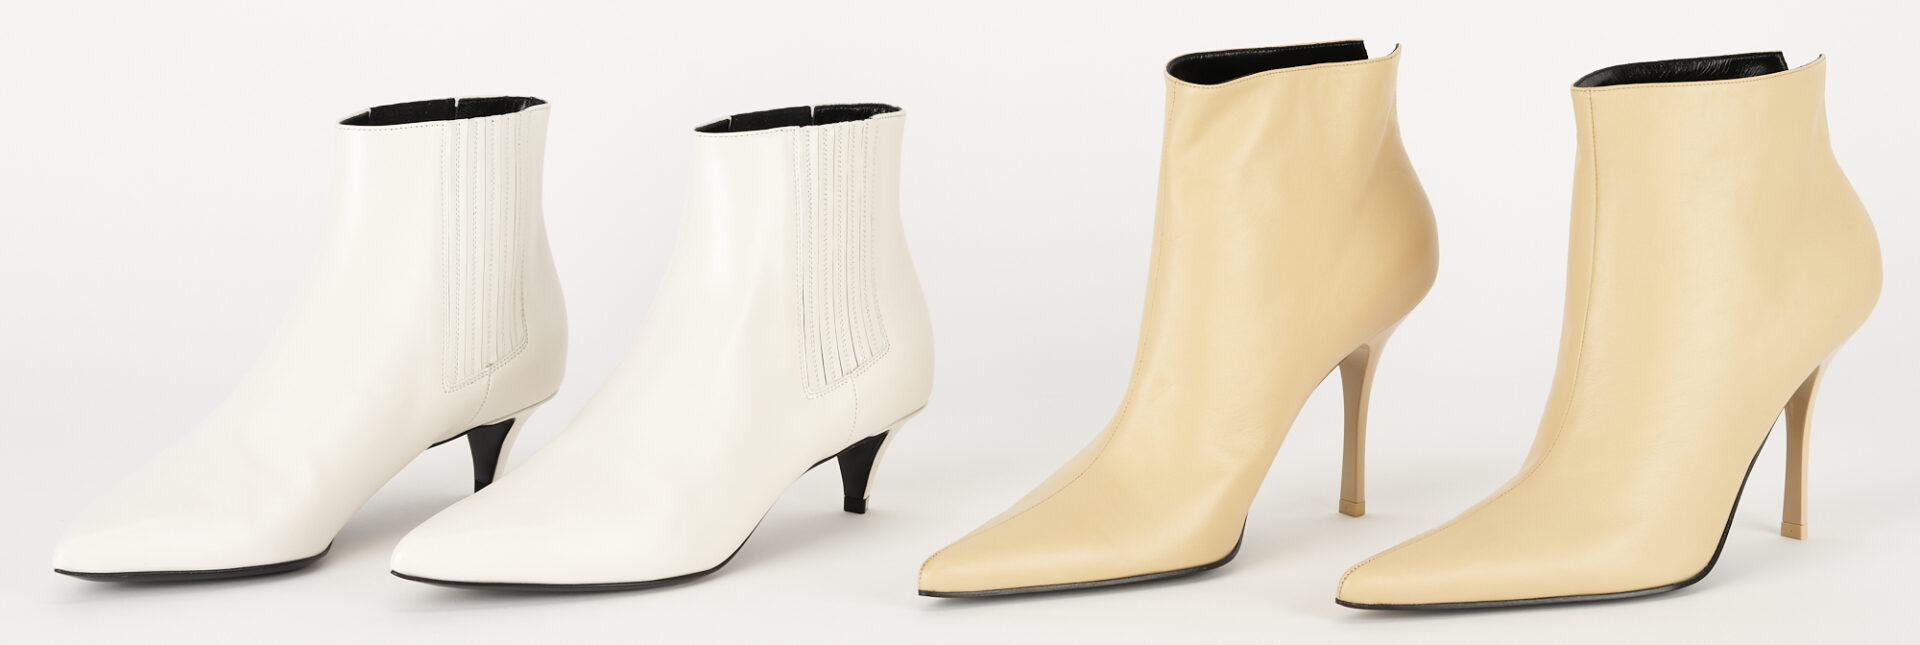 Lot 138: 4 Pairs of Celine Boots, Academy, Western, Camel & Cream